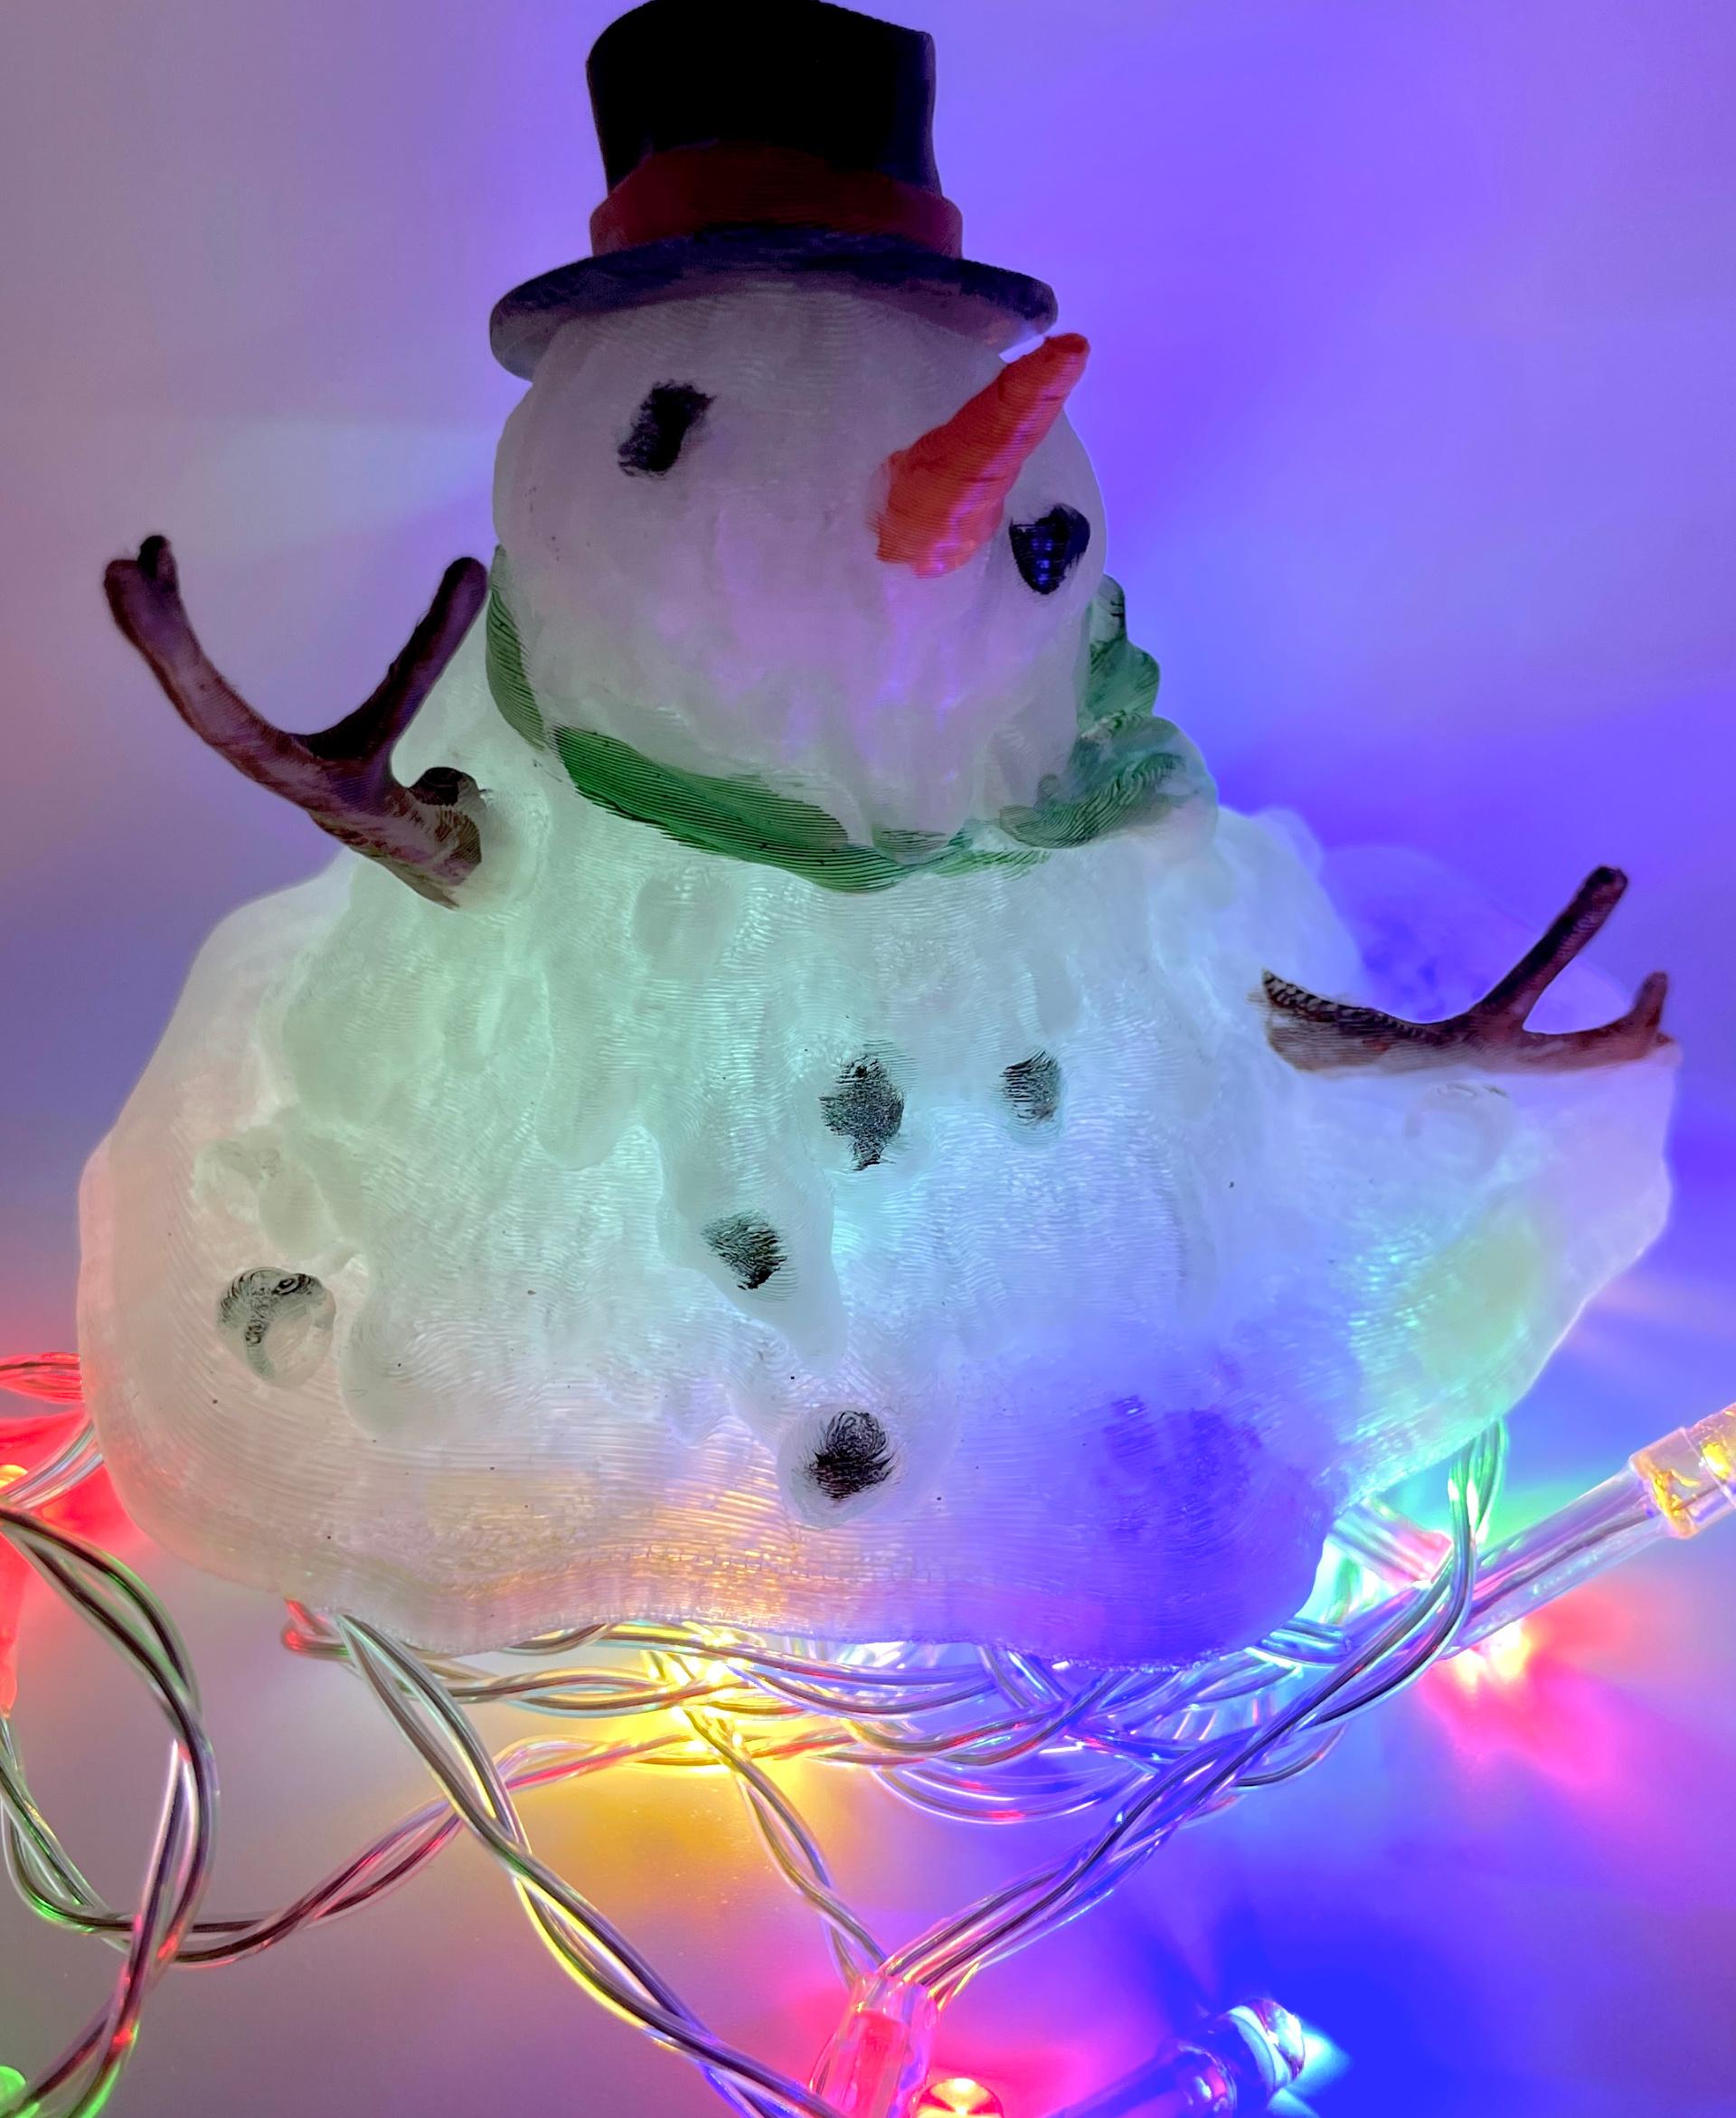 Aussie Snowman  - So fun to play with a "natural" filament and lights!  - 3d model